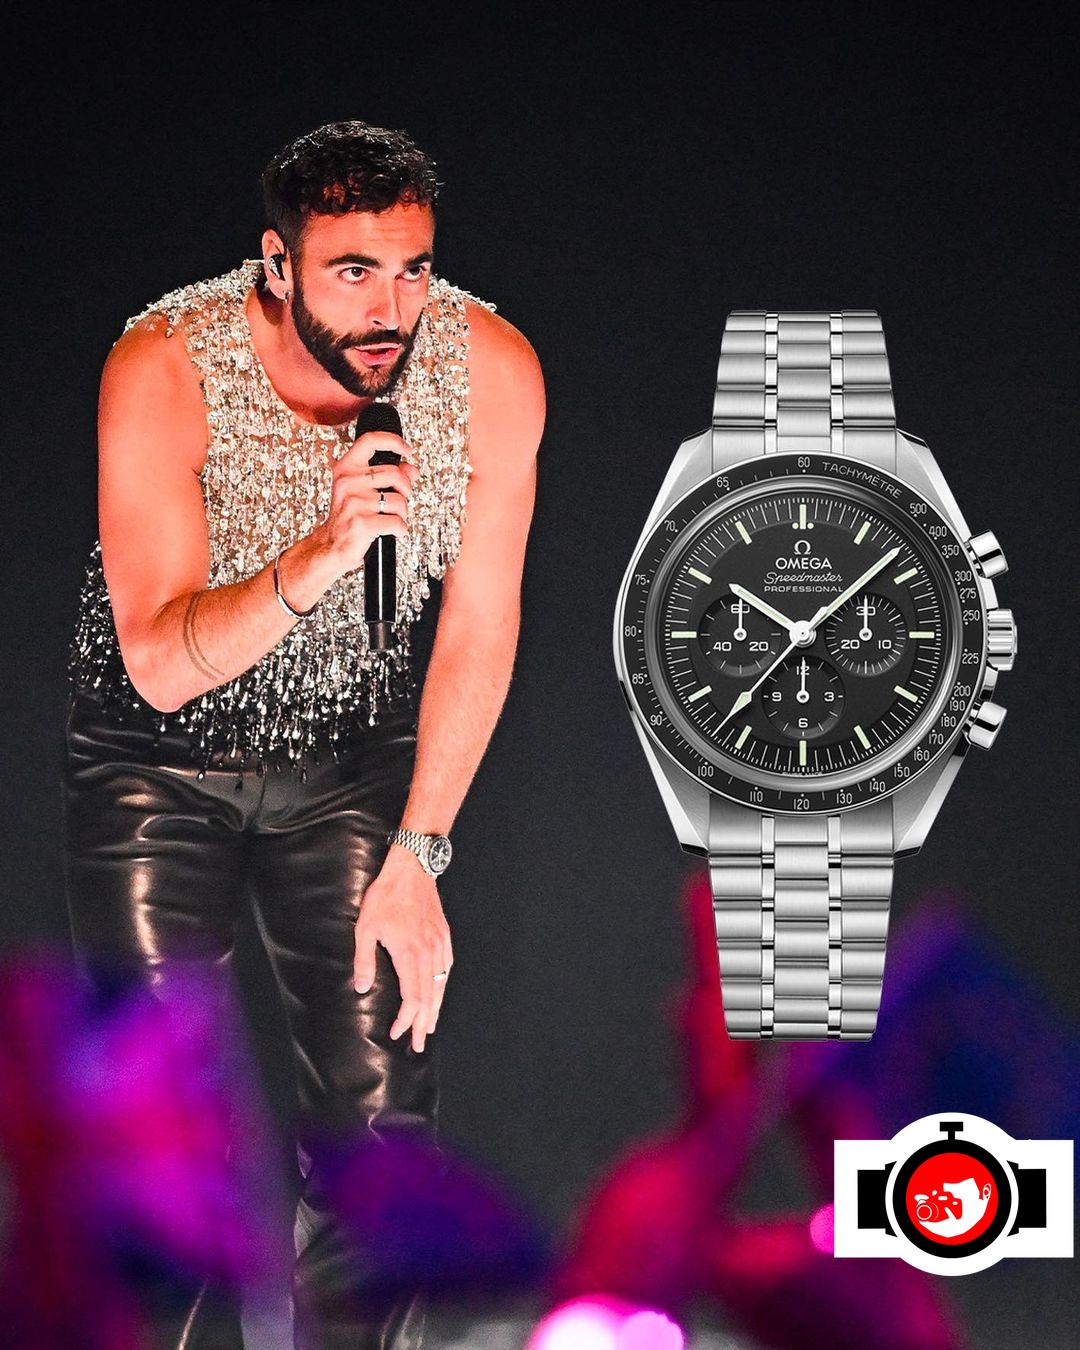 singer Marco Mengoni spotted wearing a Omega 310.30.42.50.01.002